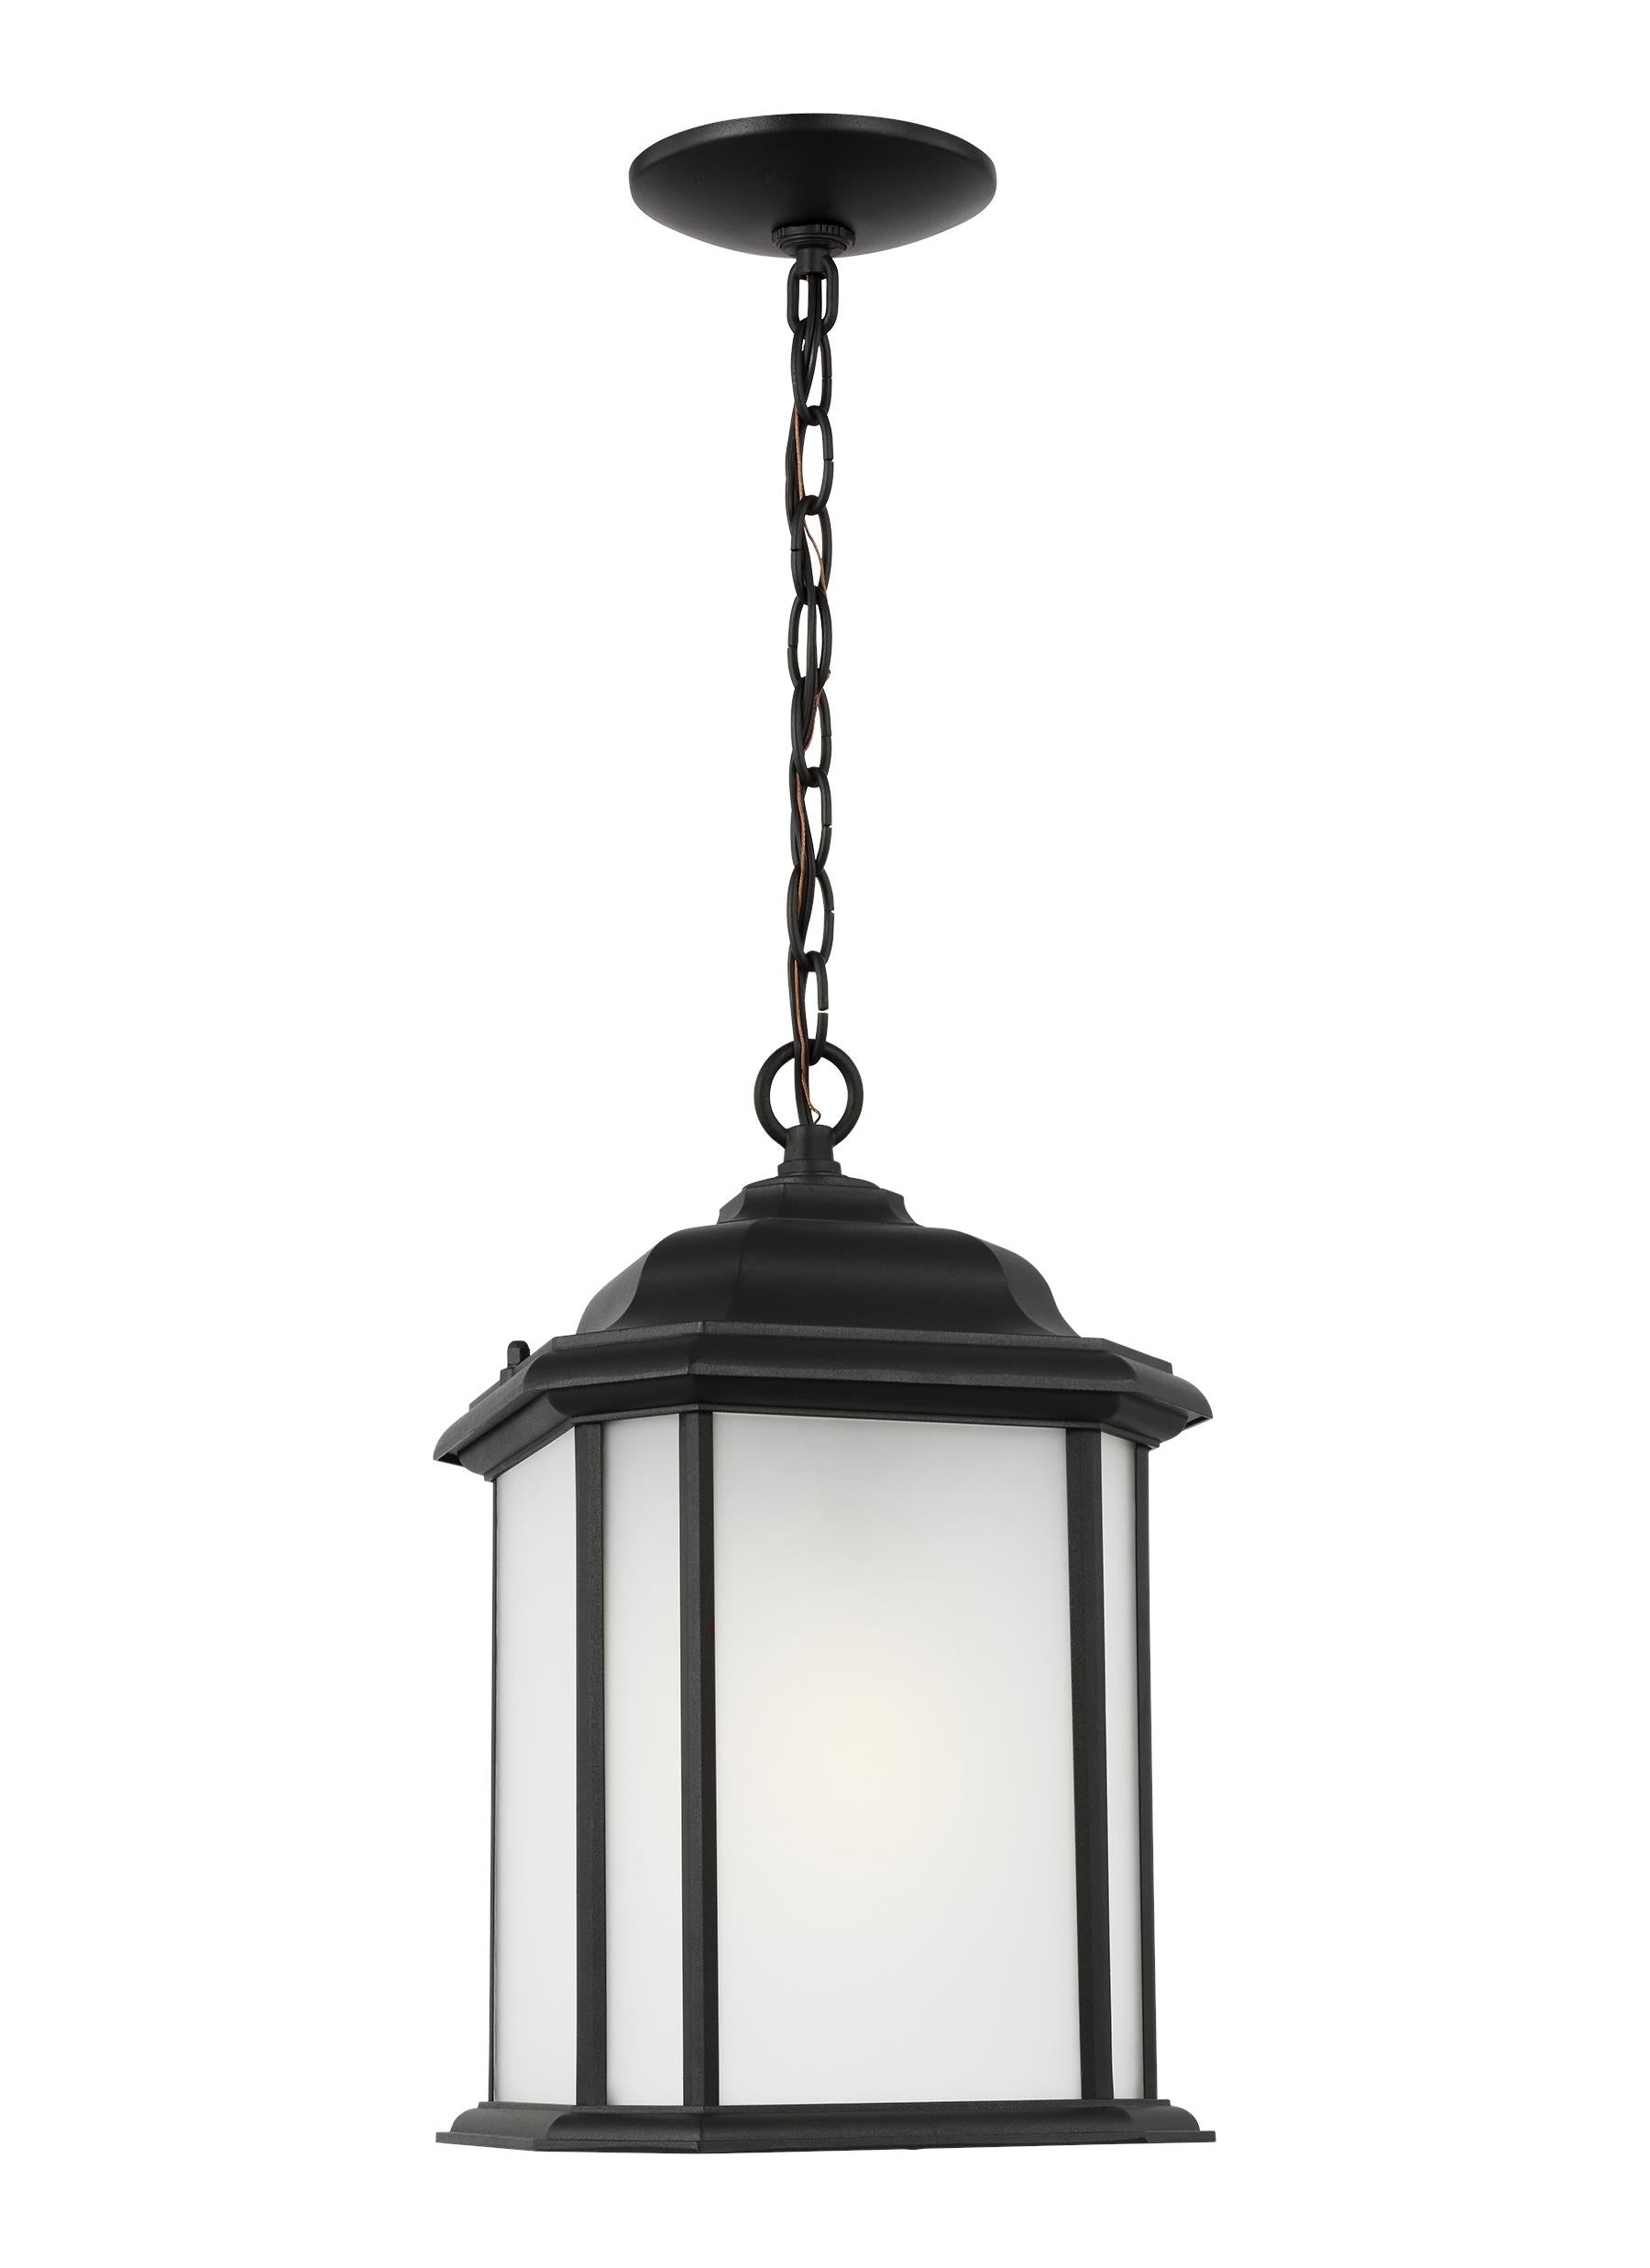 Kent traditional 1-light outdoor exterior ceiling hanging pendant in black finish with satin etched glass panels